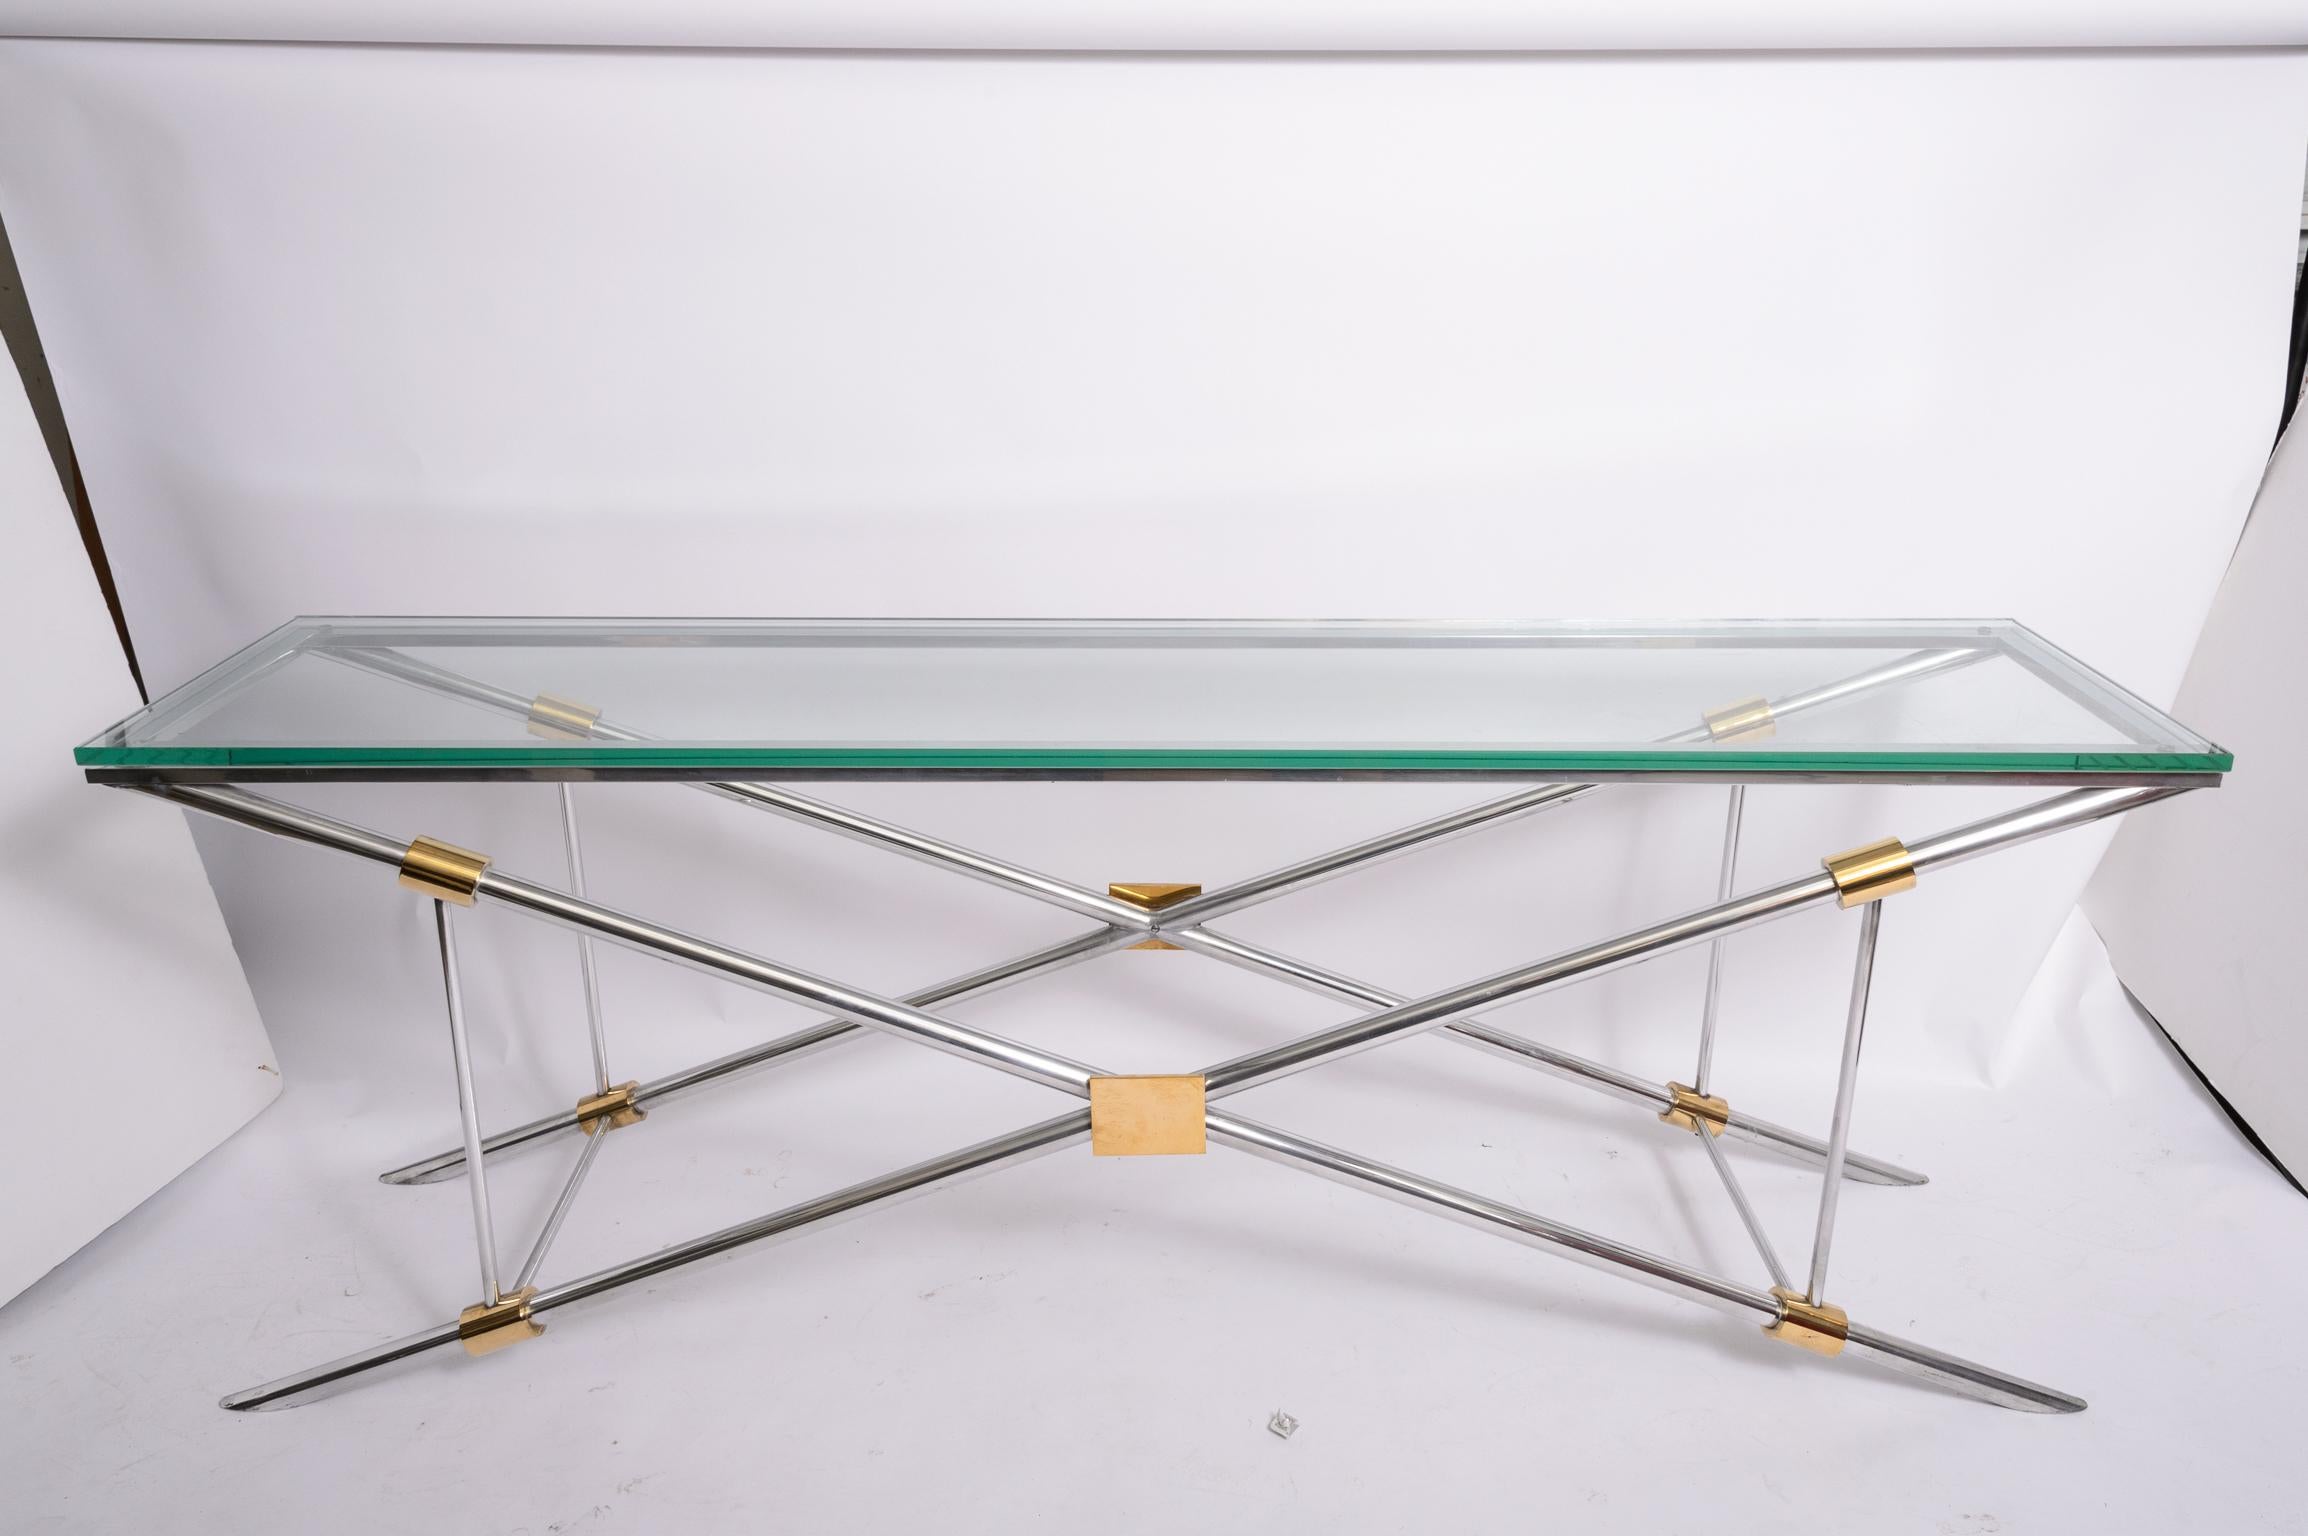 John Vesey Aluminum,Brass and Glass Console Table
Elegance in its classical simplicity
This is the largest version of the form 